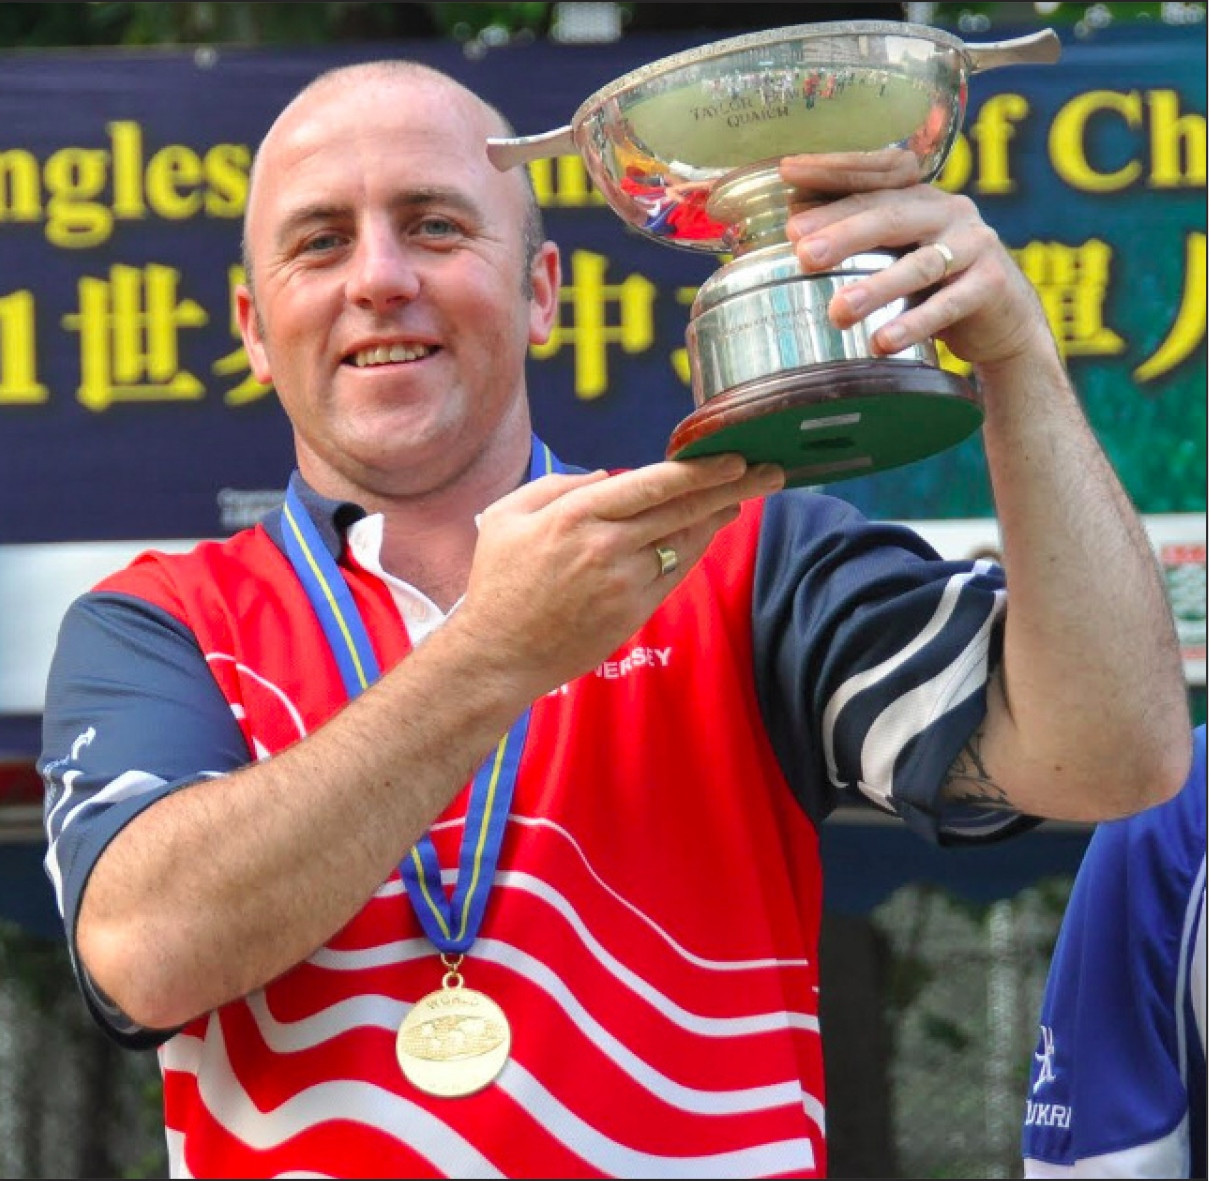 Jersey's Thomas Greechan is one of the former winners set to compete at the World Bowls Singles Champion of Champions in Sydney ©World Bowls